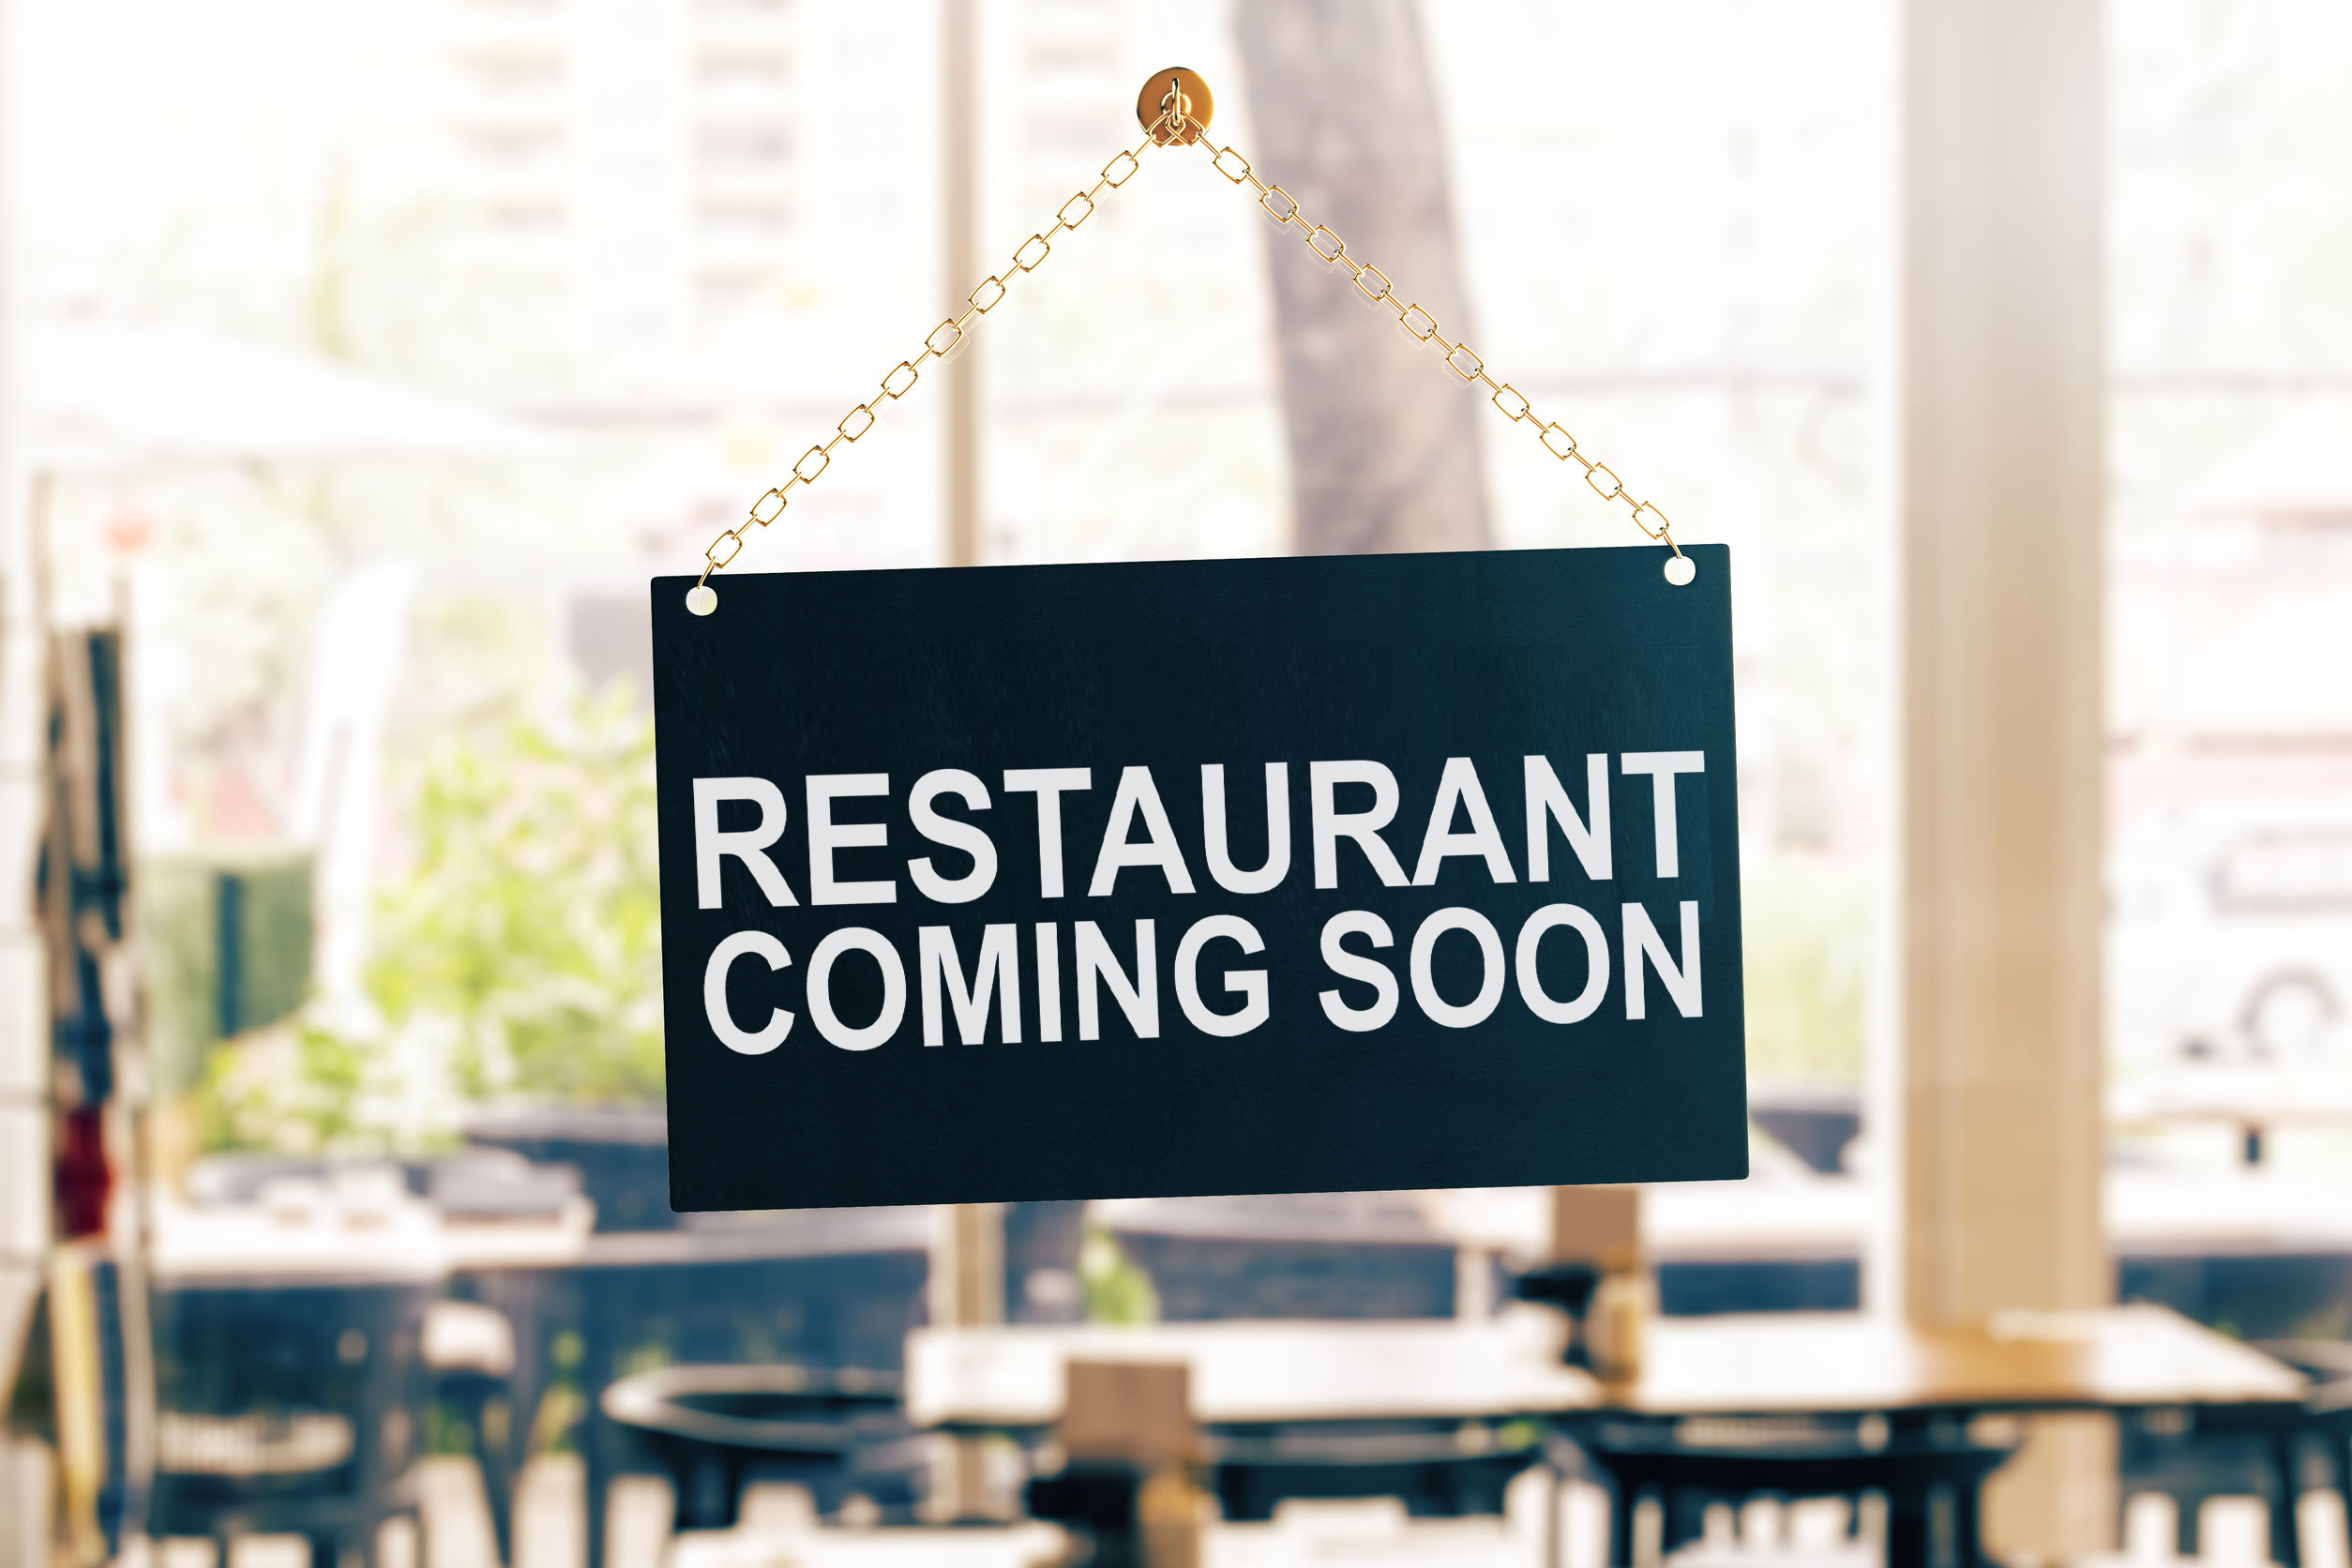 Sign hanging on glass window that reads "Restaurant Coming Soon"